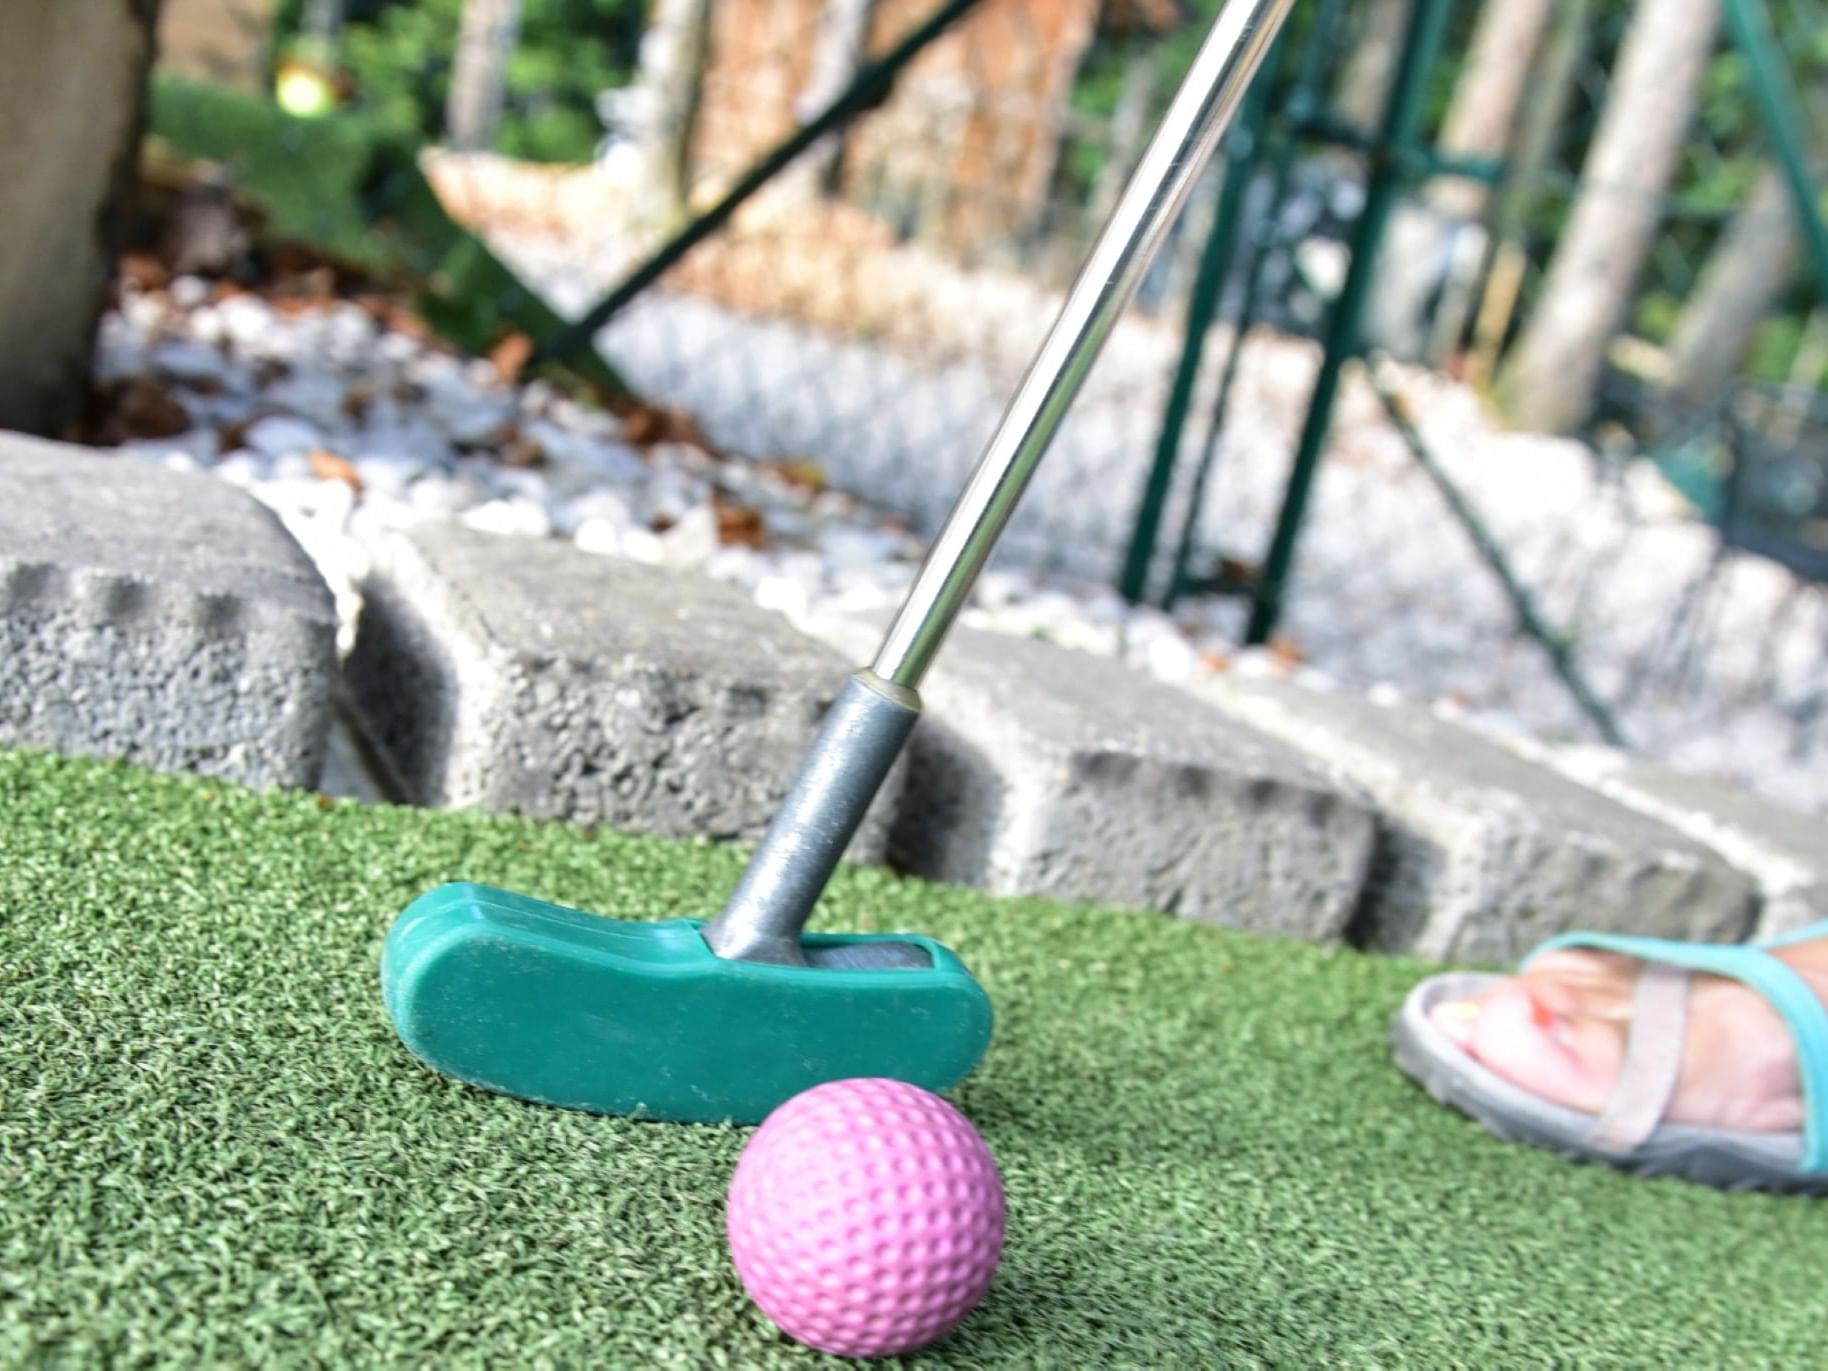 Close-up of a golf club by the pink ball in Wonder Mountain Fun Park near Gorges Grant Hotel